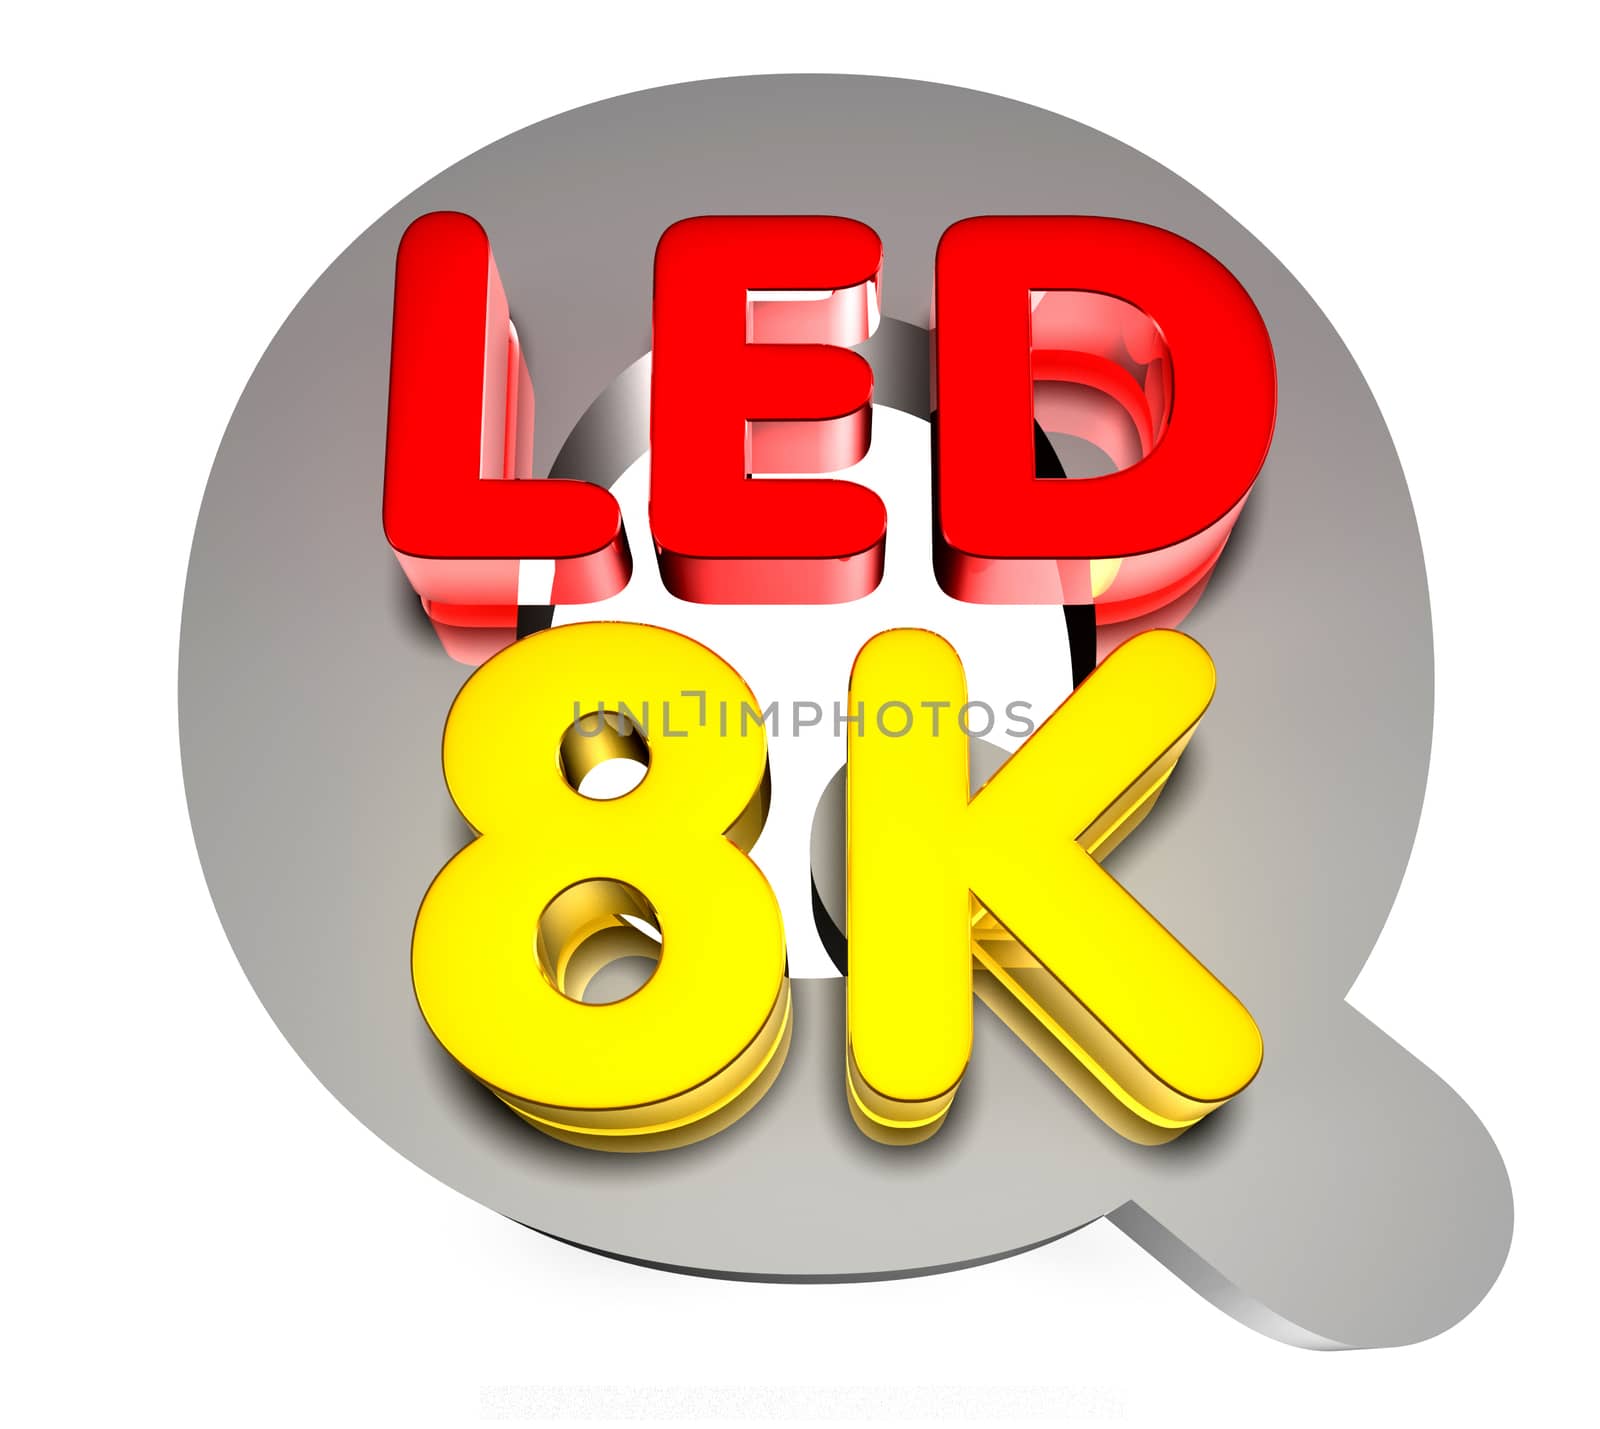 Q lED 8K 3D rendering on white background.With Clipping path.